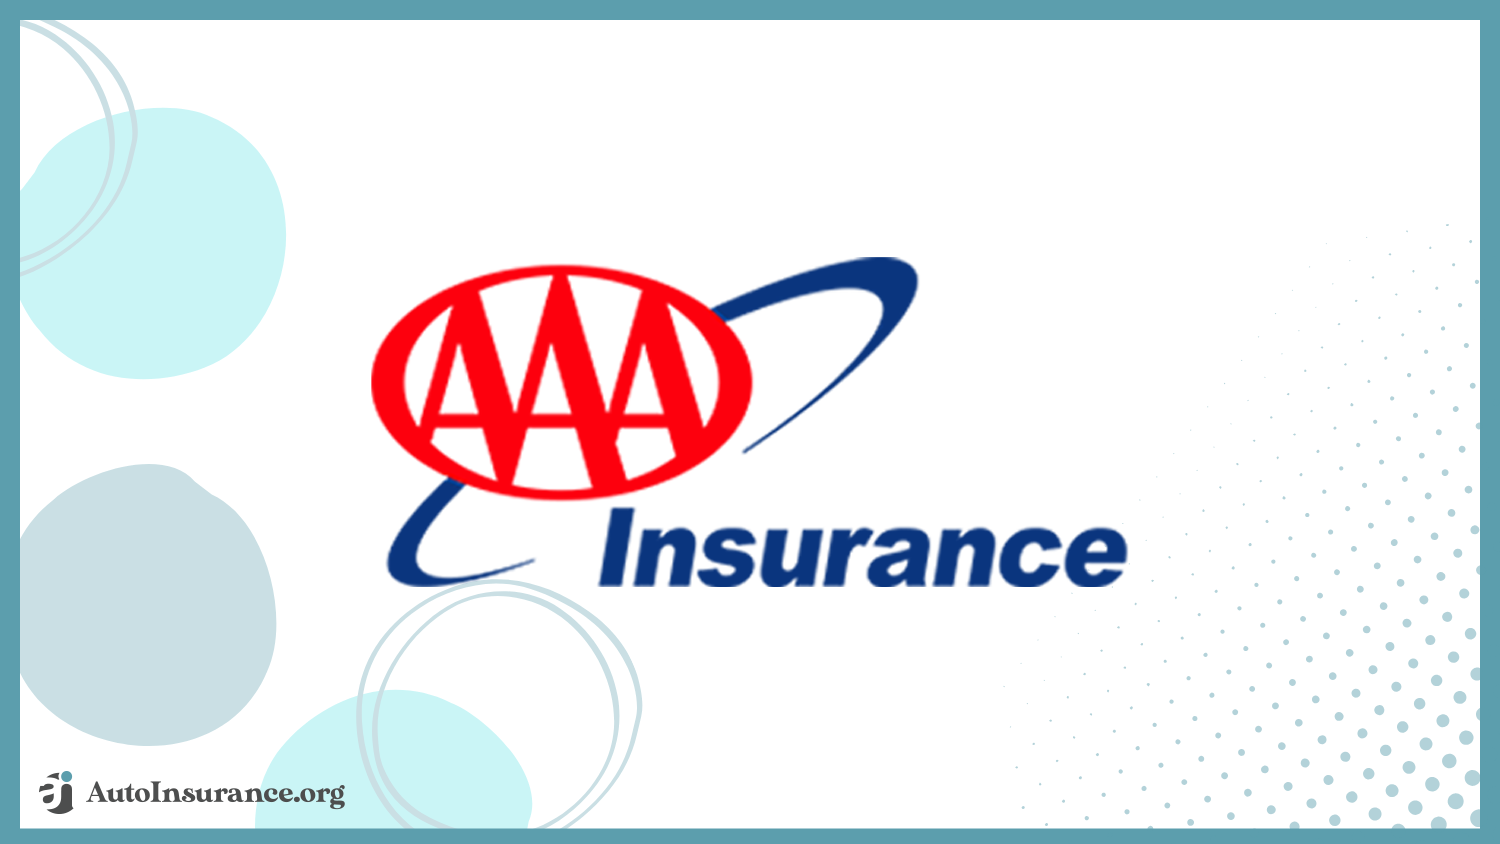 AAA: Best Auto Insurance for Wheelchair-Accessible Vehicles